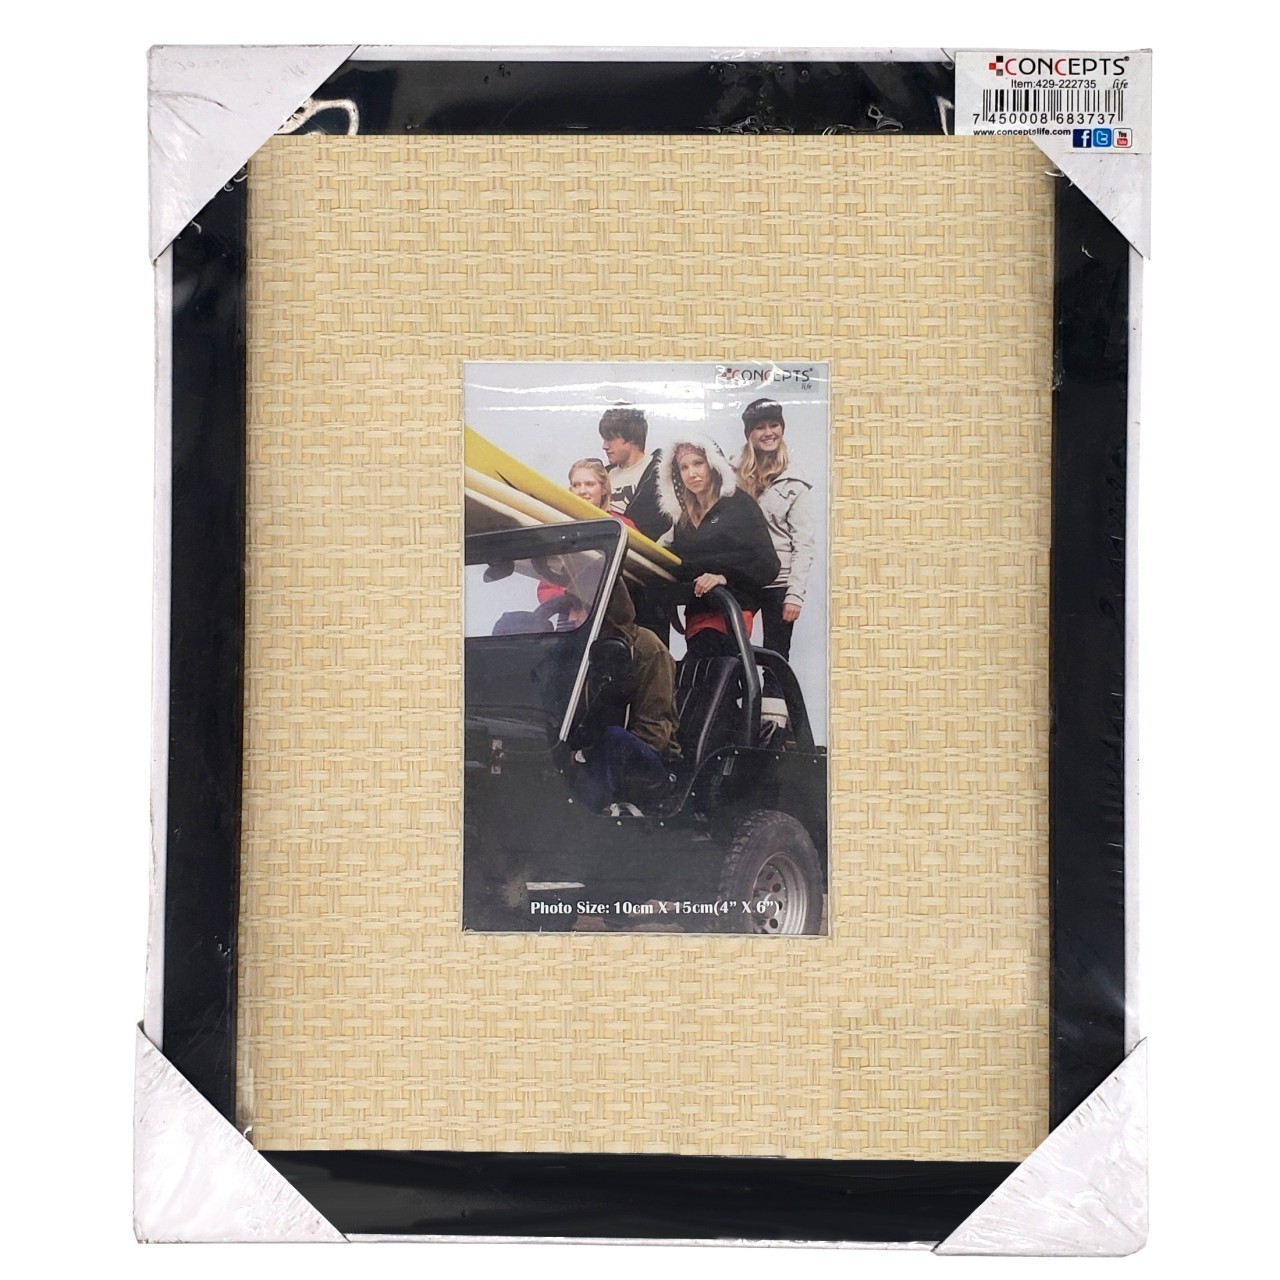 CONCEPTS PICTURE FRAME